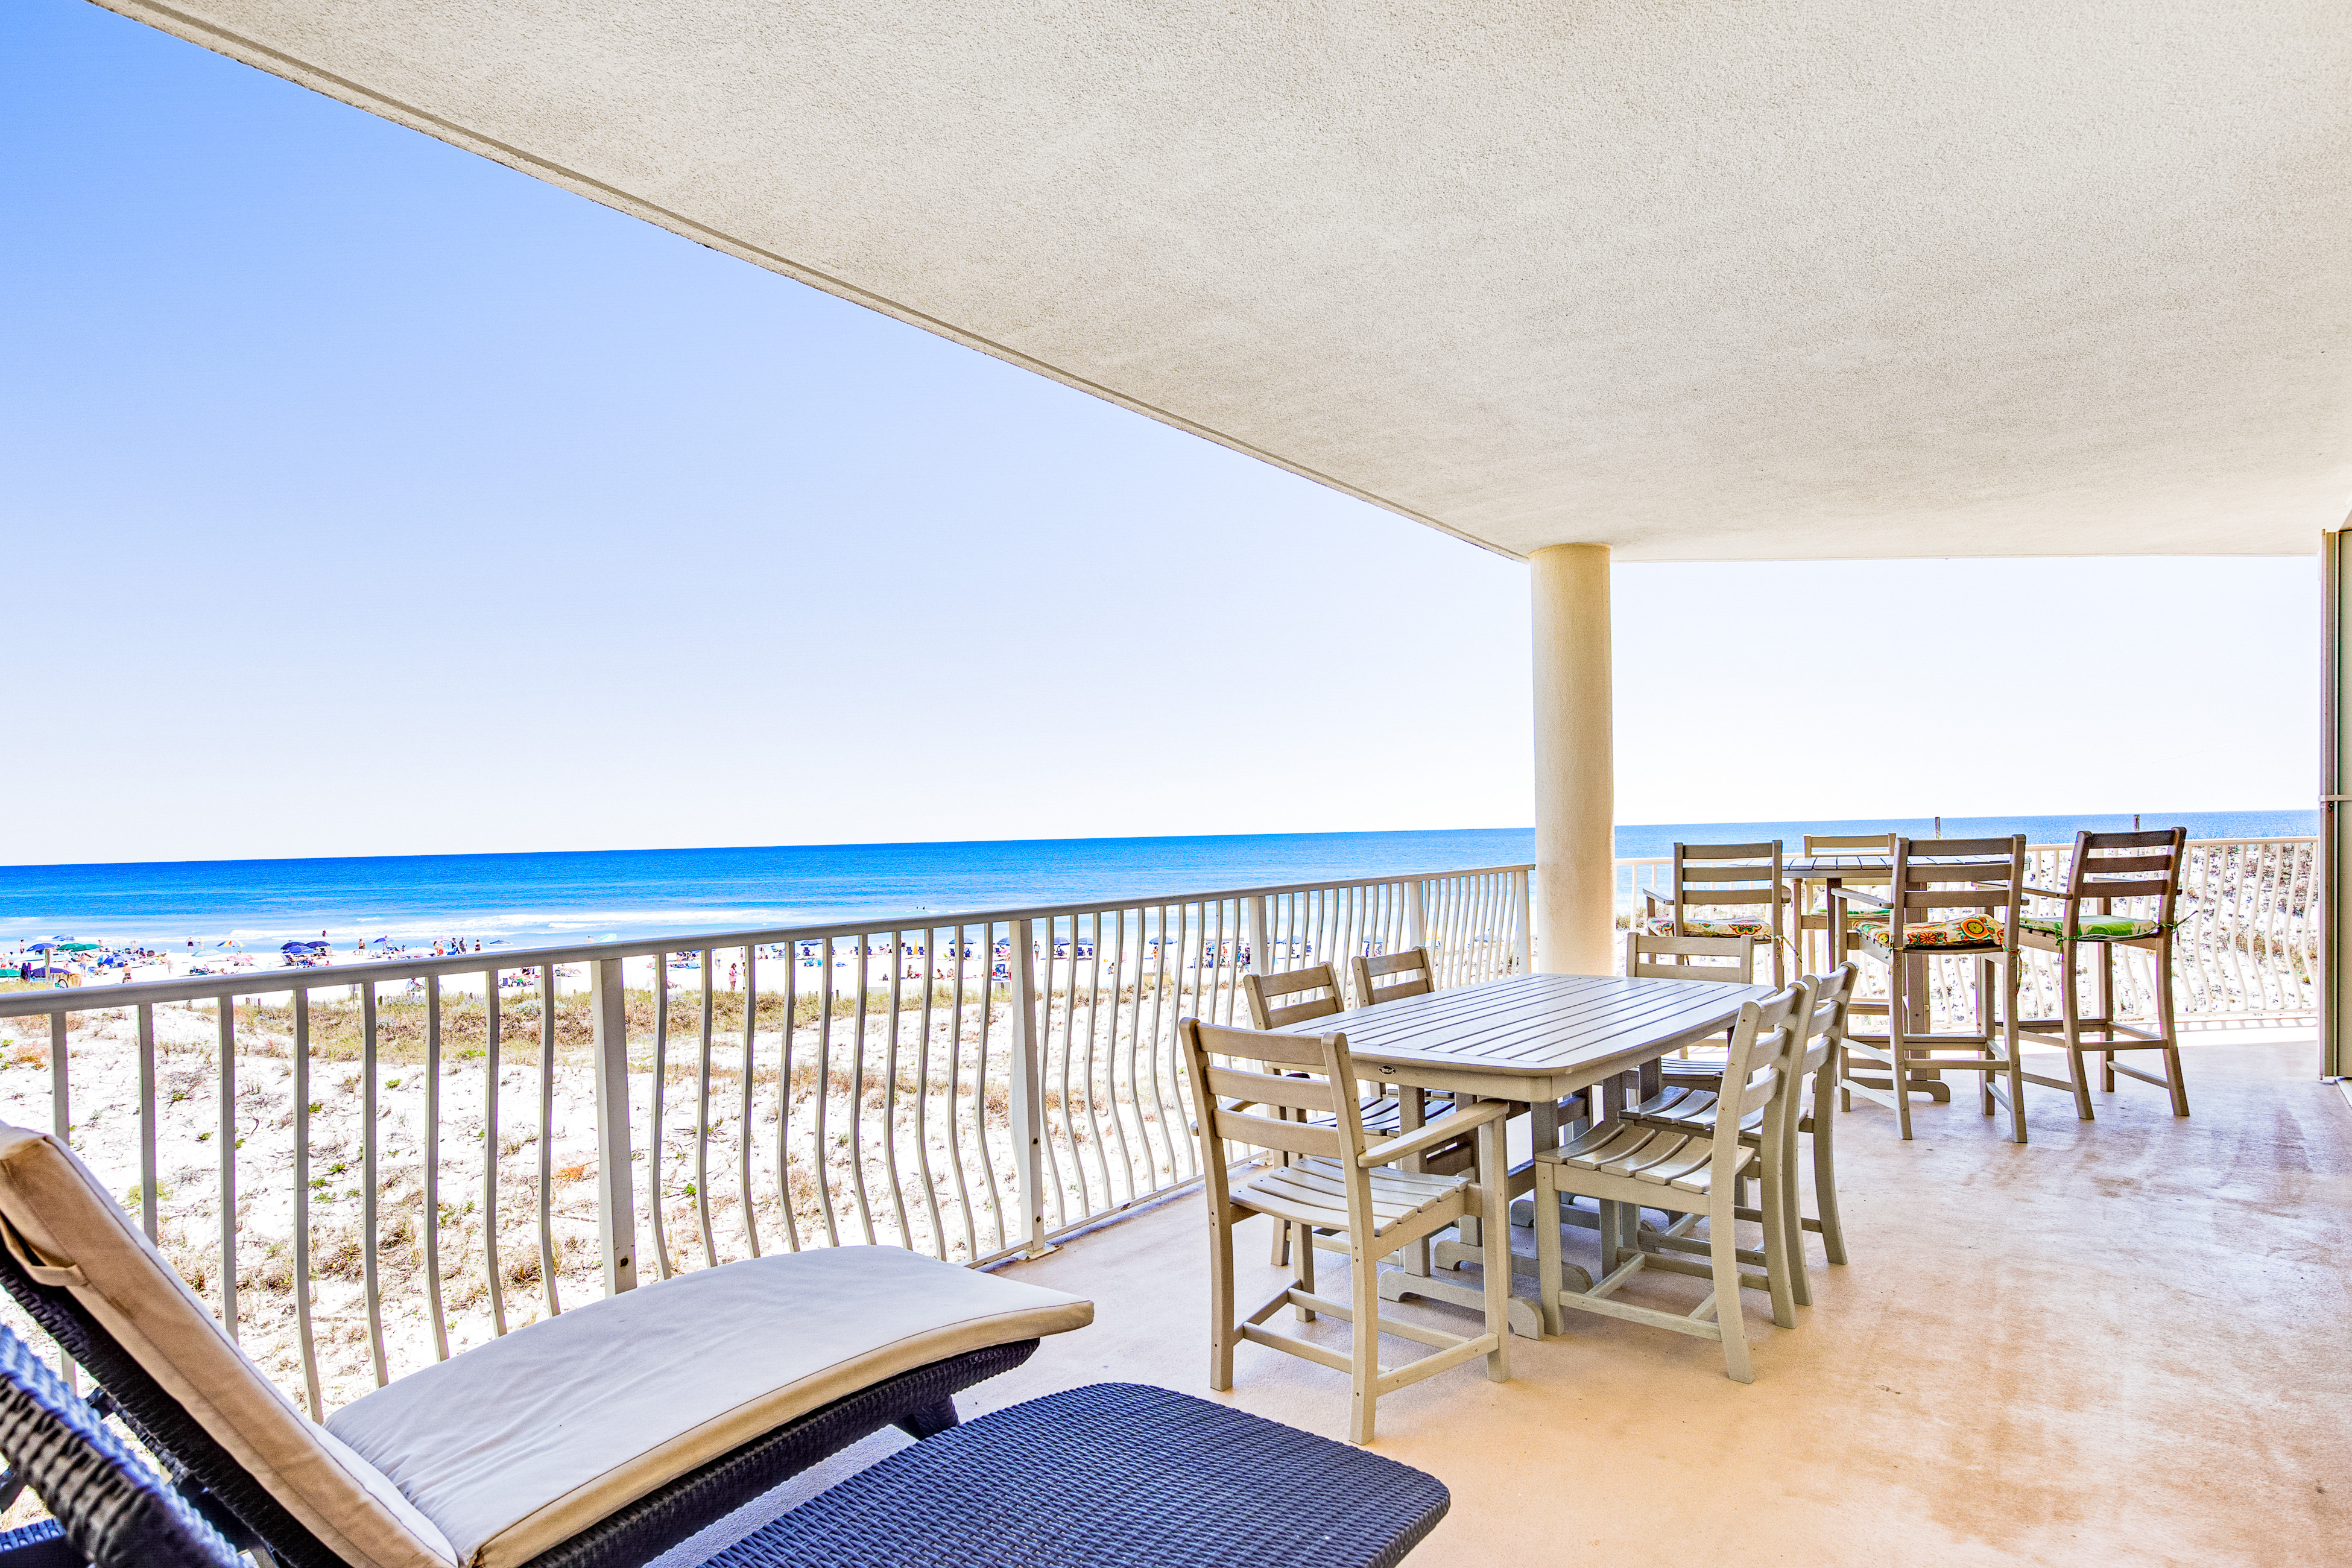 Dunes of Seagrove A210 Condo rental in Dunes of Seagrove in Highway 30-A Florida - #28